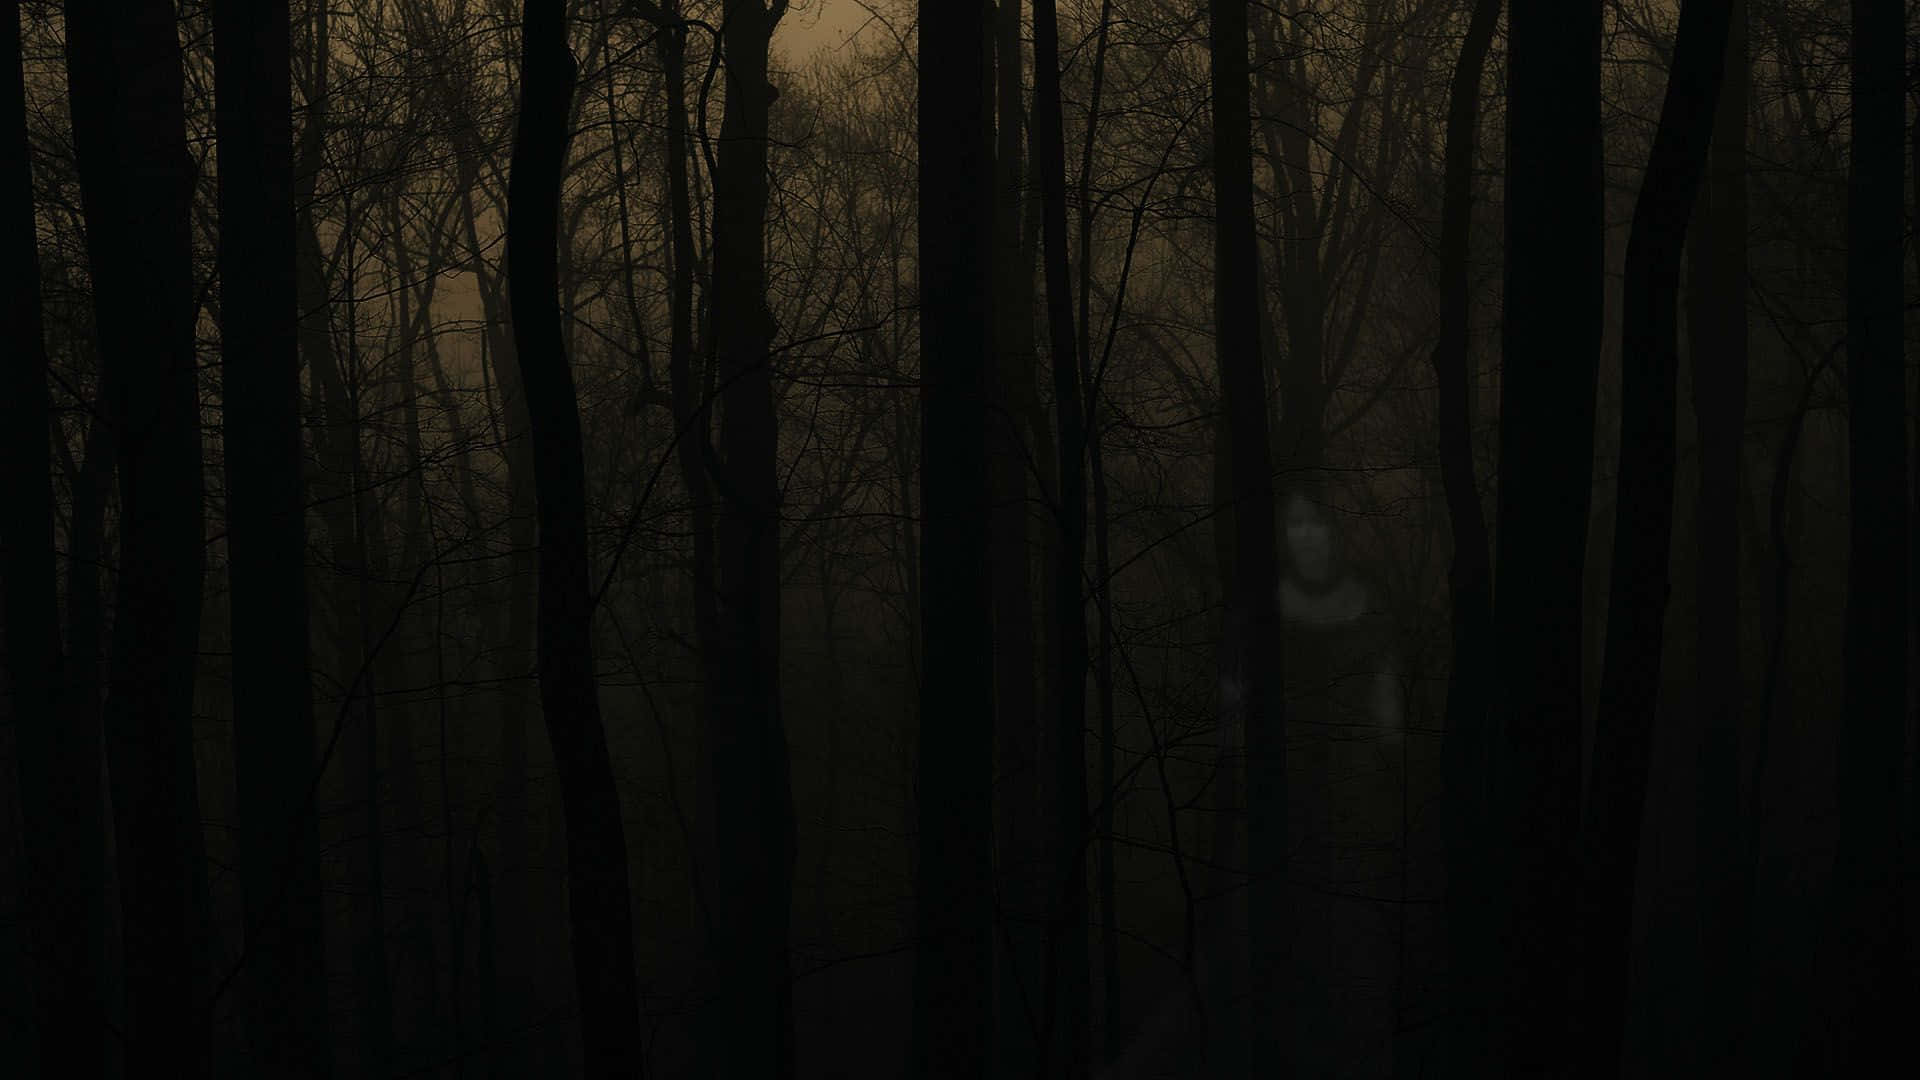 “The Spooky Woodlands of Haunted Forests” Wallpaper